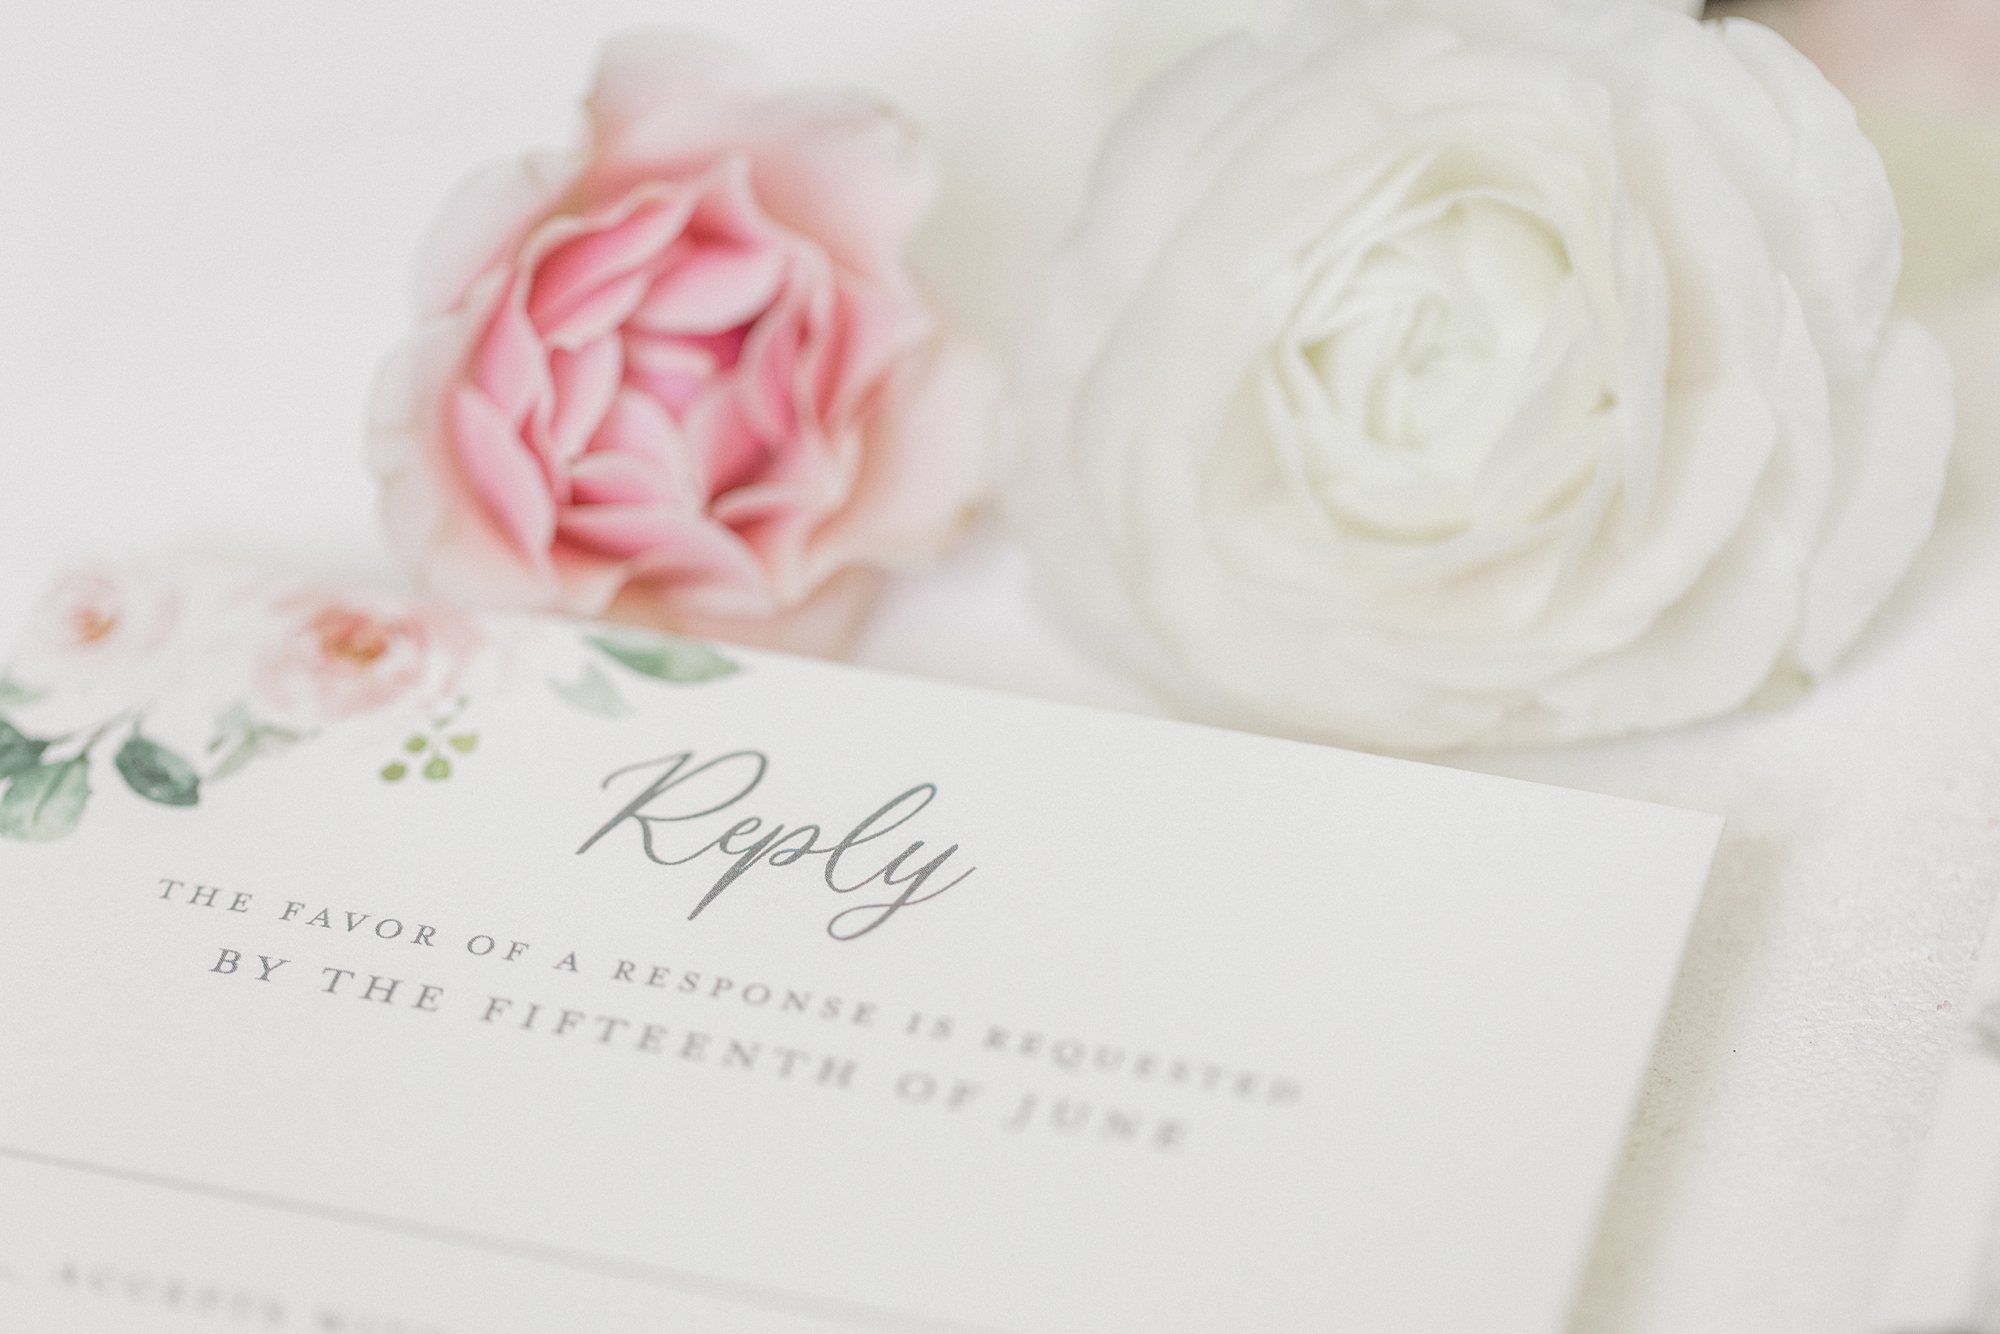 RSVP card for wedding invitation with pink and white roses